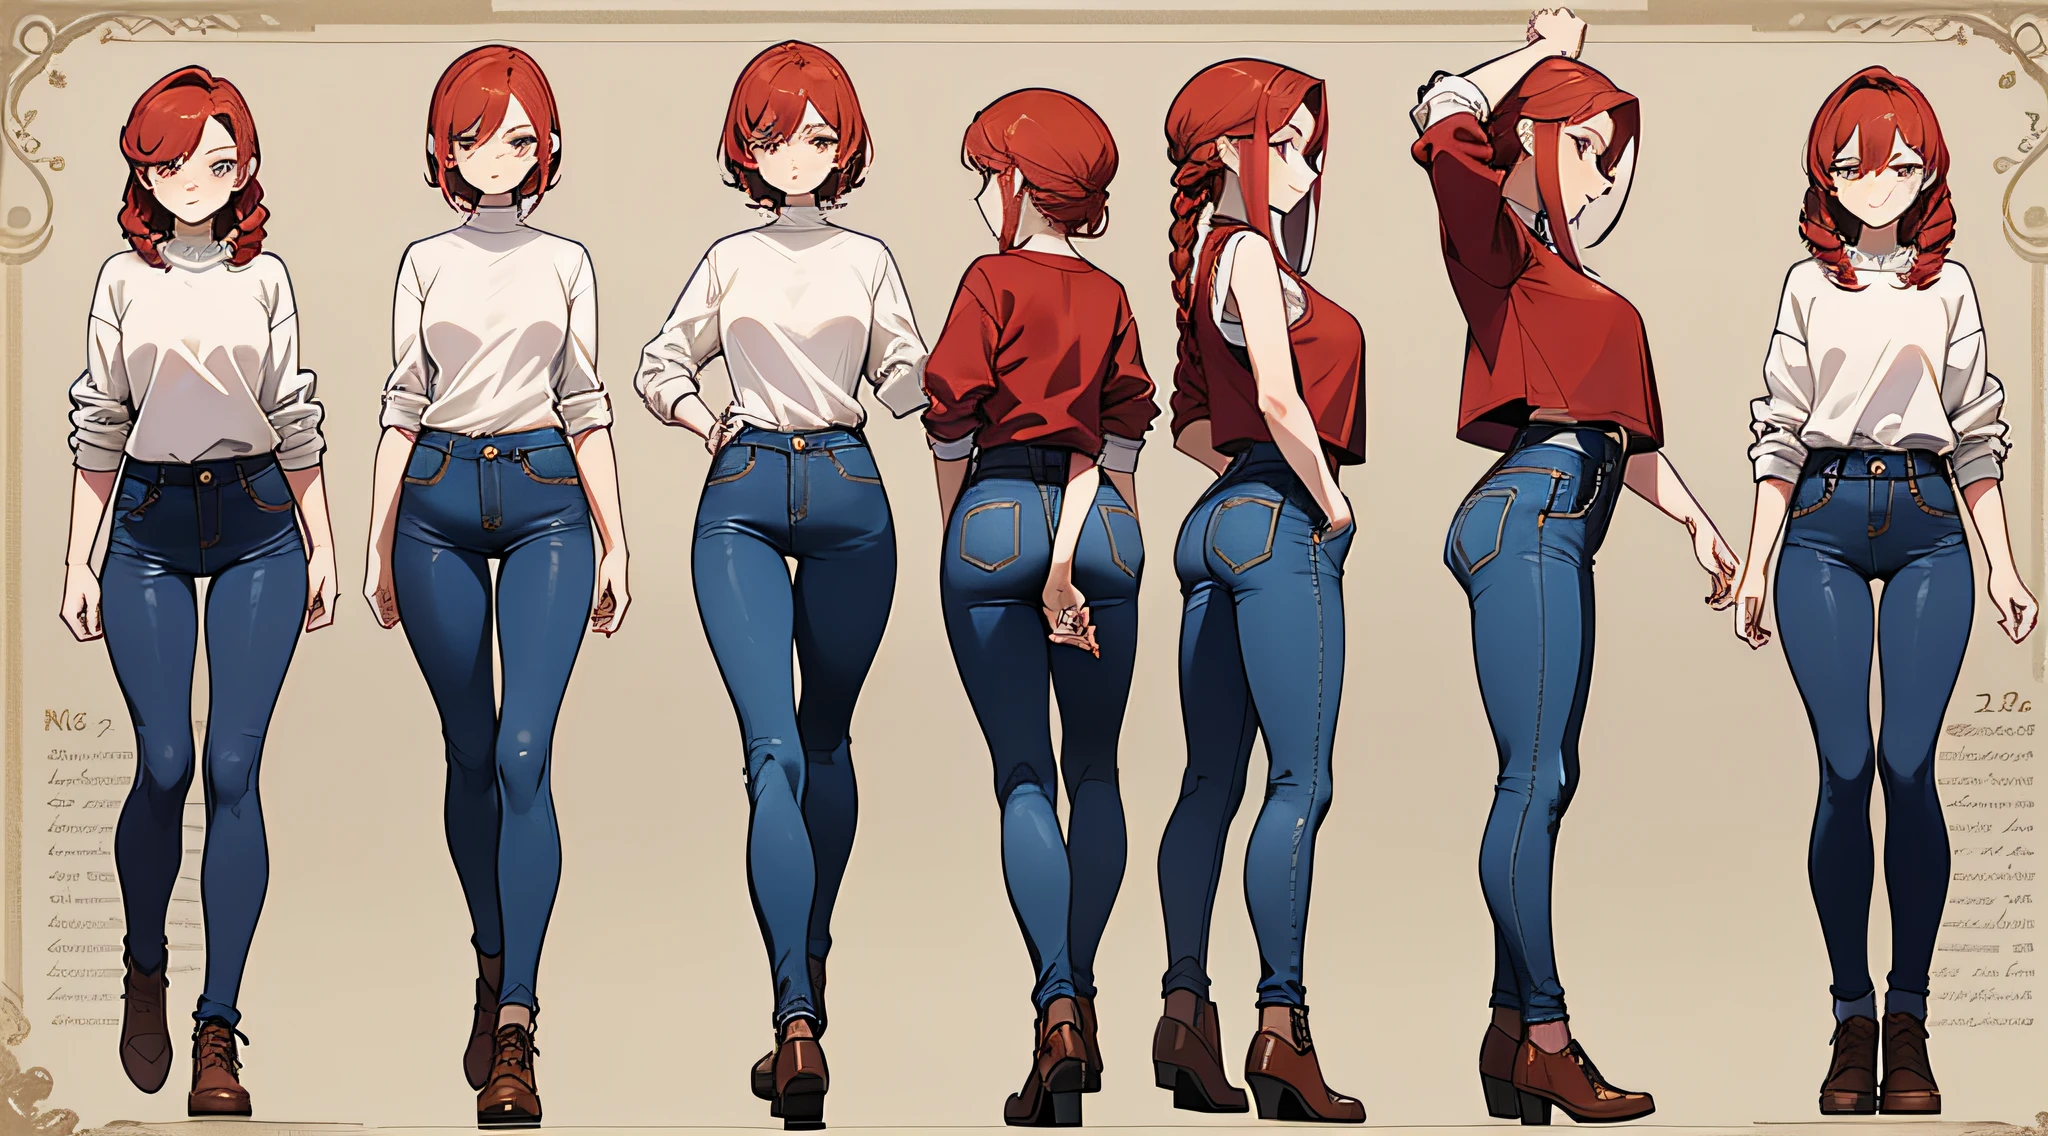 21 year old, redhead girl, armpit lenght hair (((narroweyes))) (((slightly awkward shy gaze))) jeans and pullover, ((corkscrew hairstyle)) detailed character sheet, frontal view, side view, three quarter view,